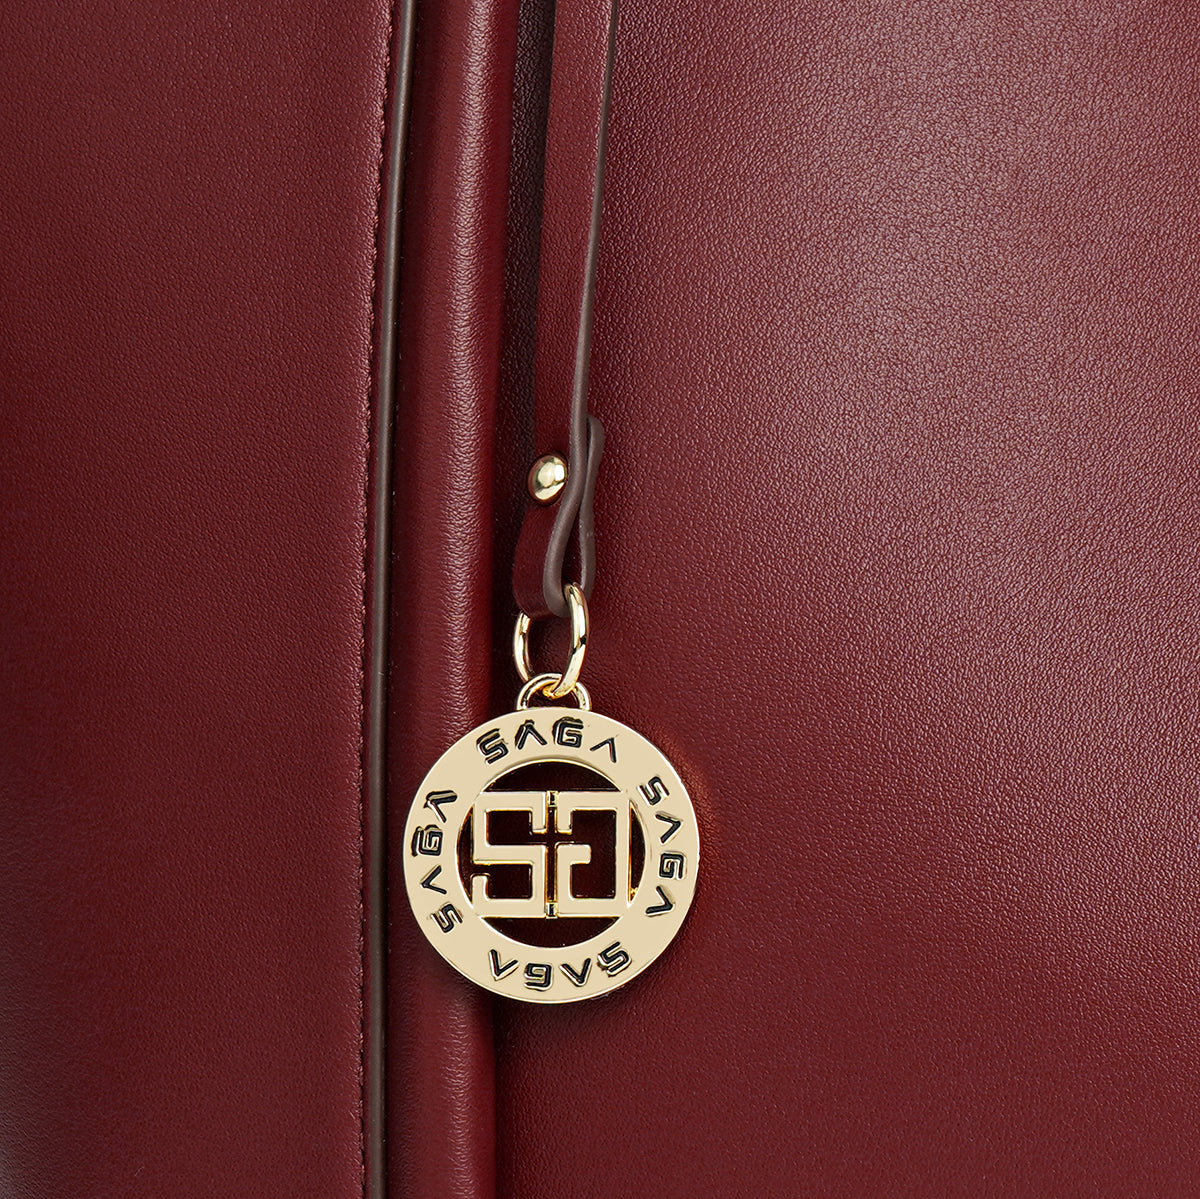 A spacious handbag characterized by elegance, width 34 cm, in red, maroon or blue